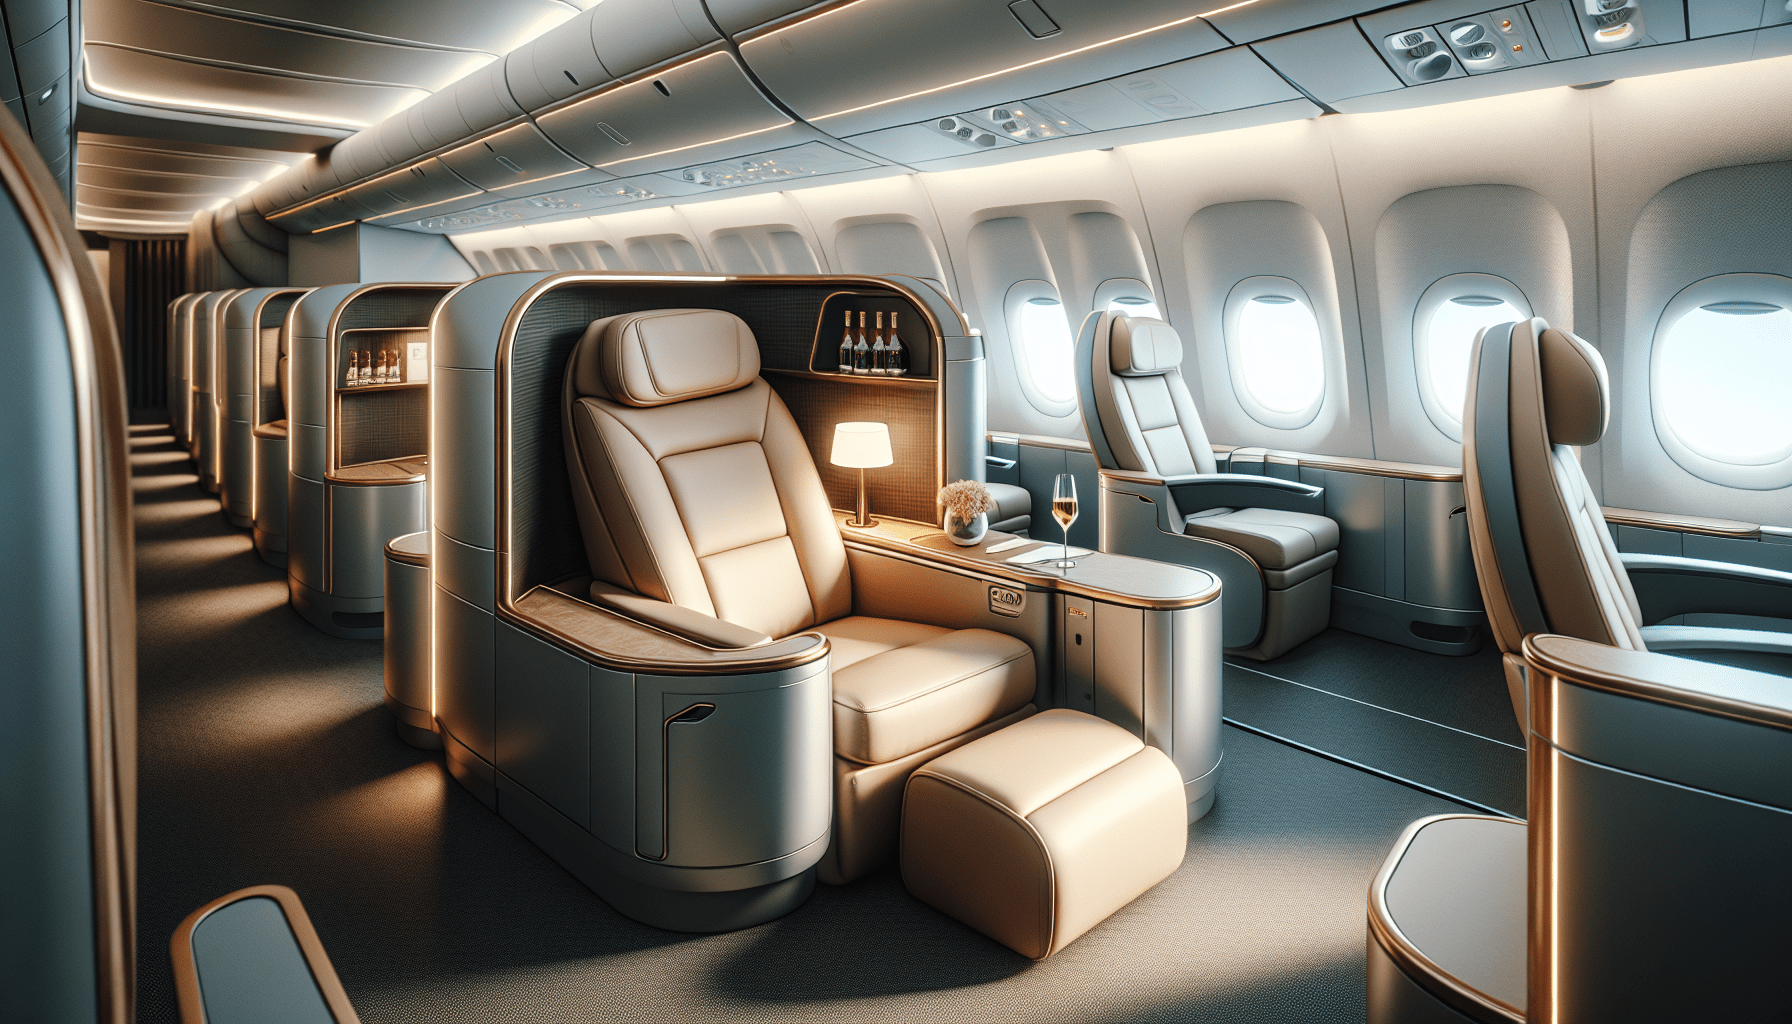 Flying in Style: Malaysia Airlines A330-200 Business Class Experience